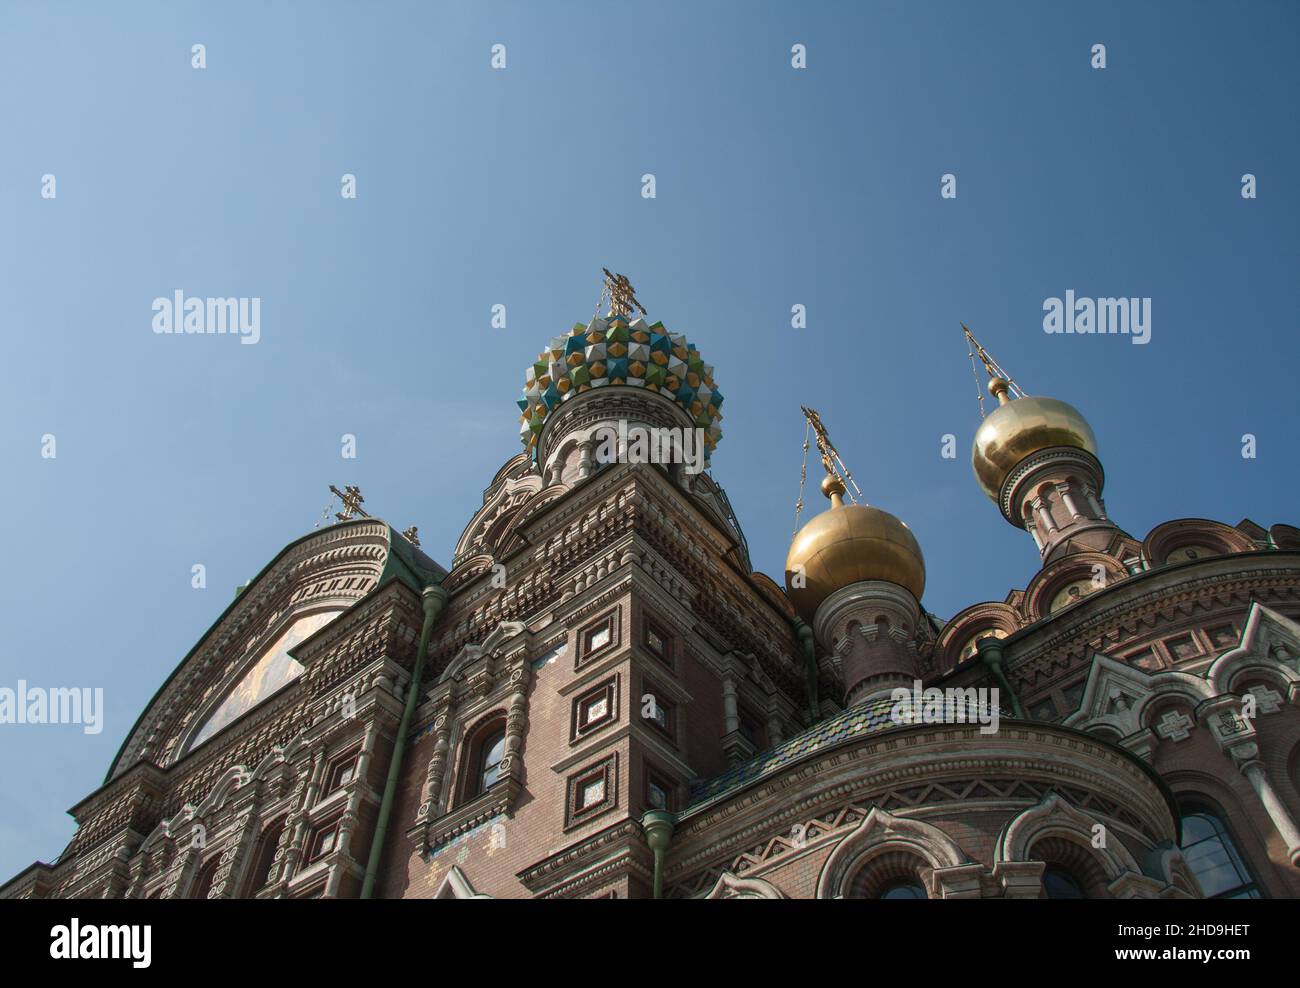 Church of the Saviour on Holy Blood, St Petersburg, Russia.   Also known as Saviour on Spilled Blood. Stock Photo